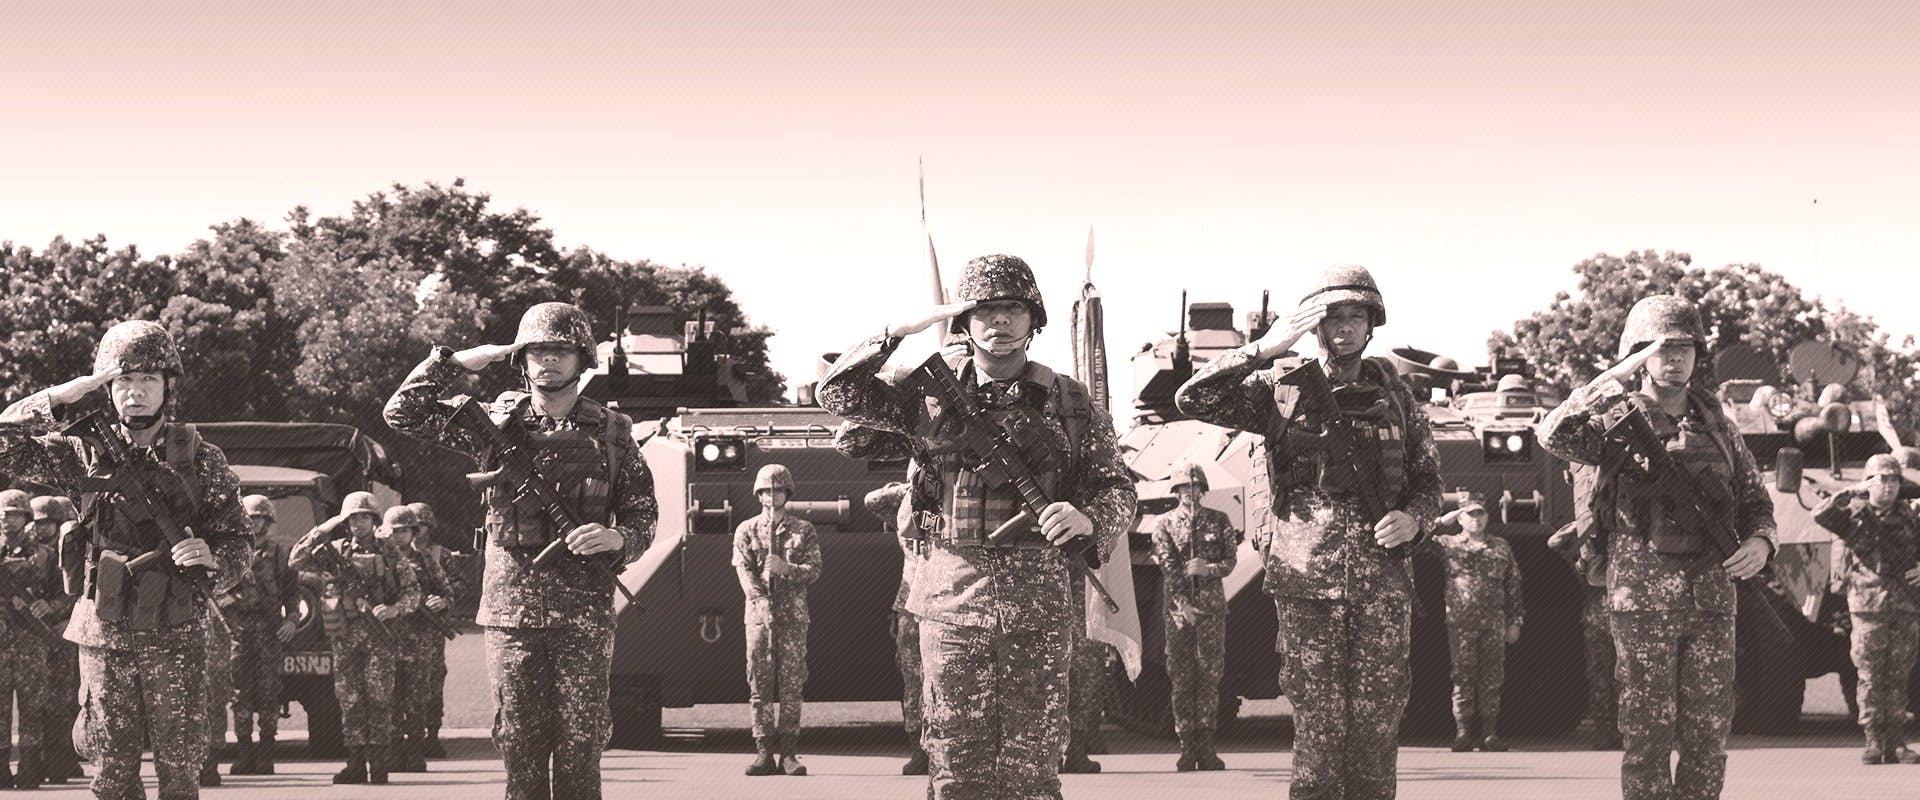 A sepia-toned photograph showing a group of soldiers in uniform saluting. They are adorned with helmets and are carrying rifles. In the background, various military vehicles and equipment can be seen, along with other soldiers standing in formation.